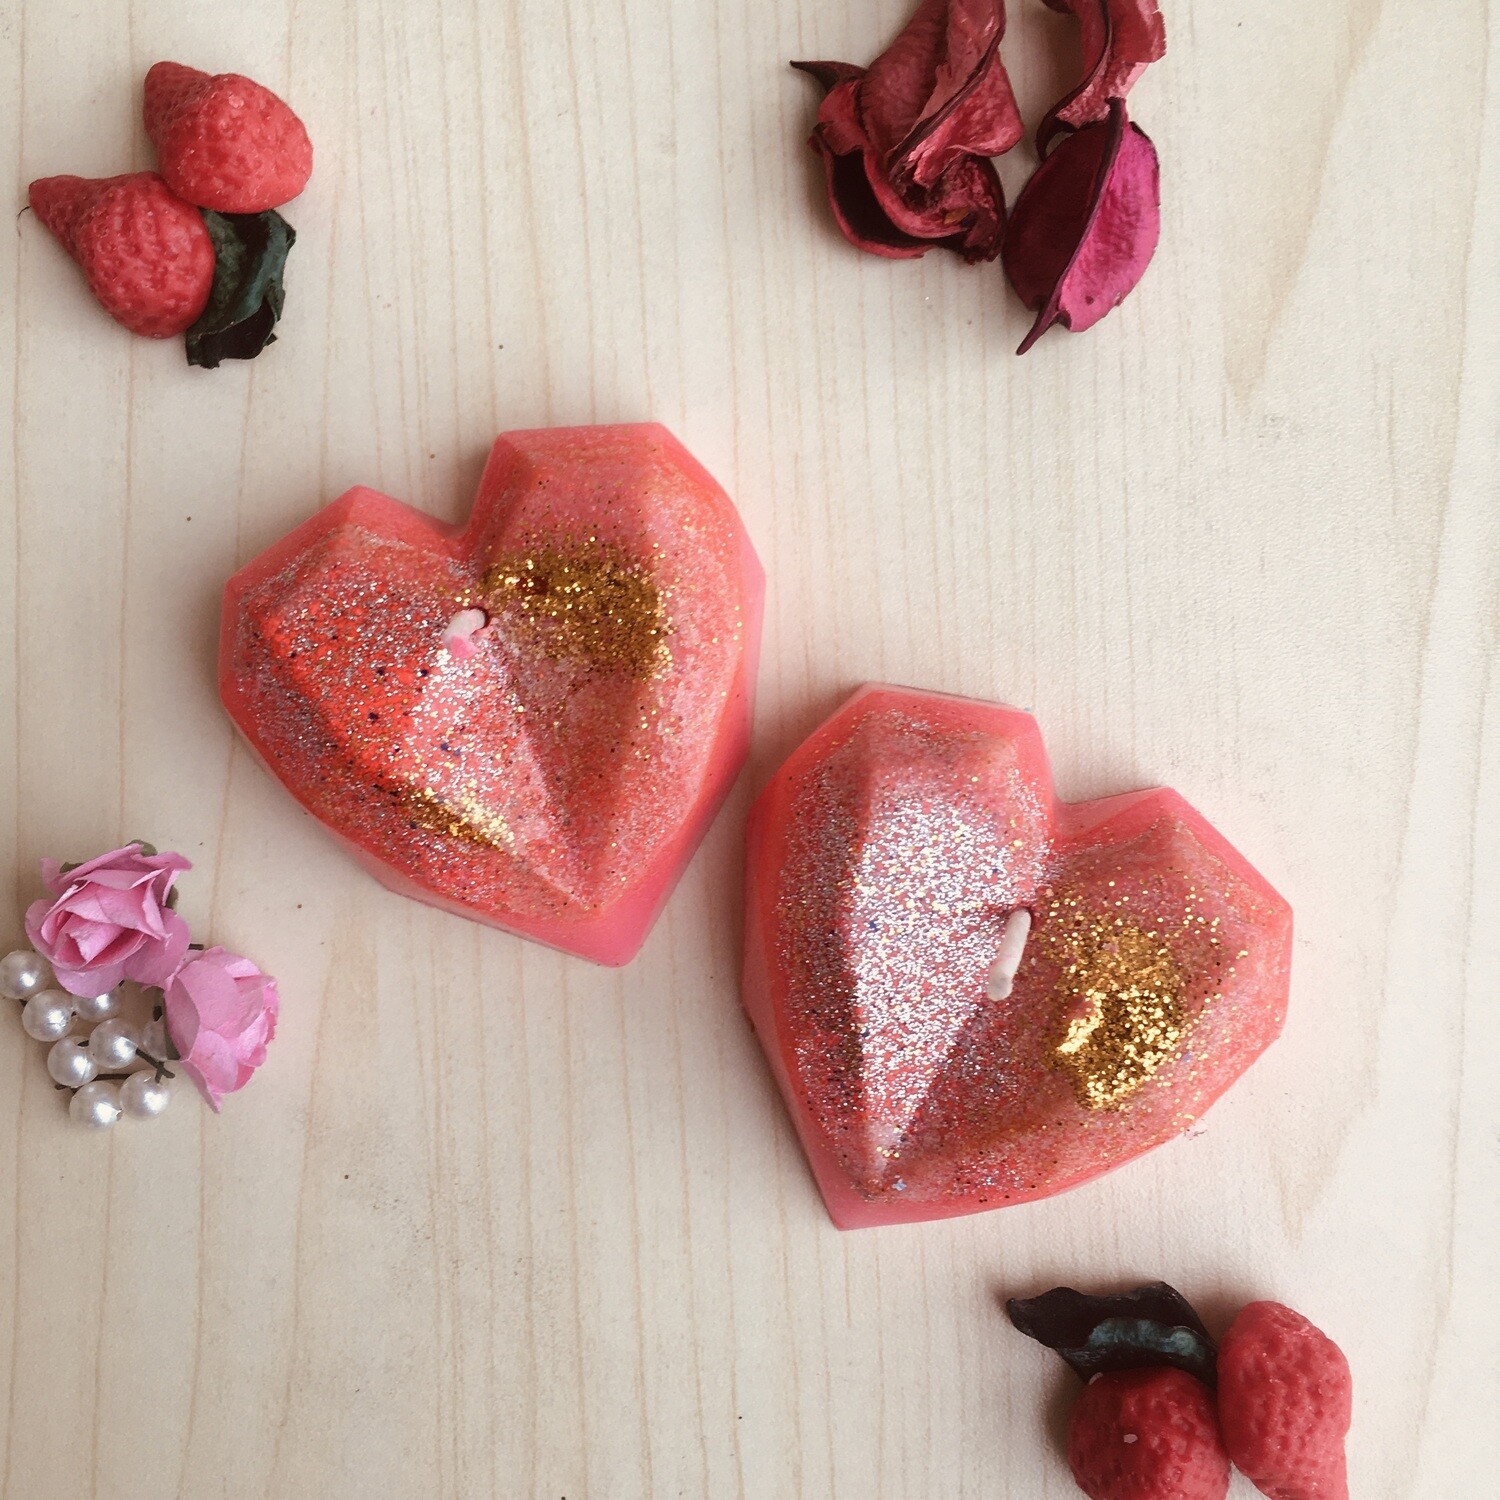 Strawberry Cheesecake Heart Candle (Set of 2)